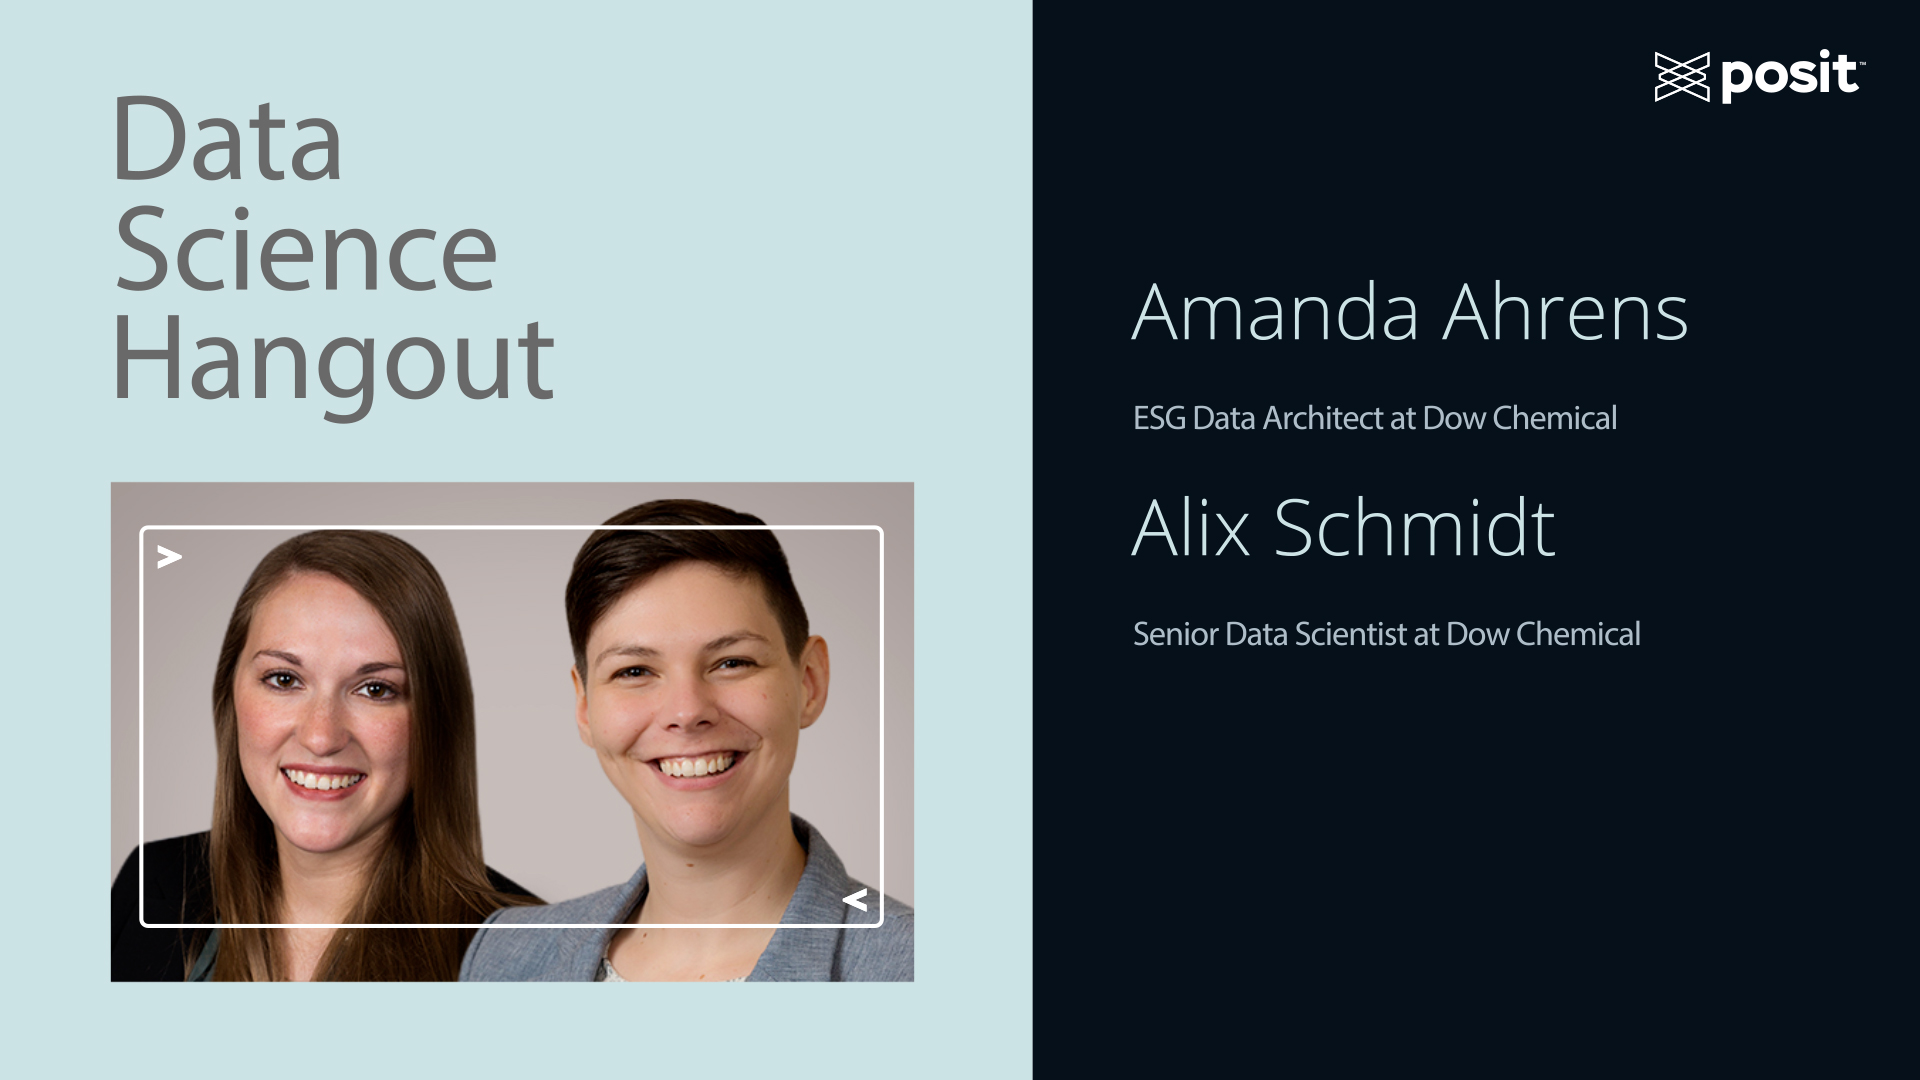 Data Science Hangout with Amanda Ahrens and Alix Schmidt at Dow